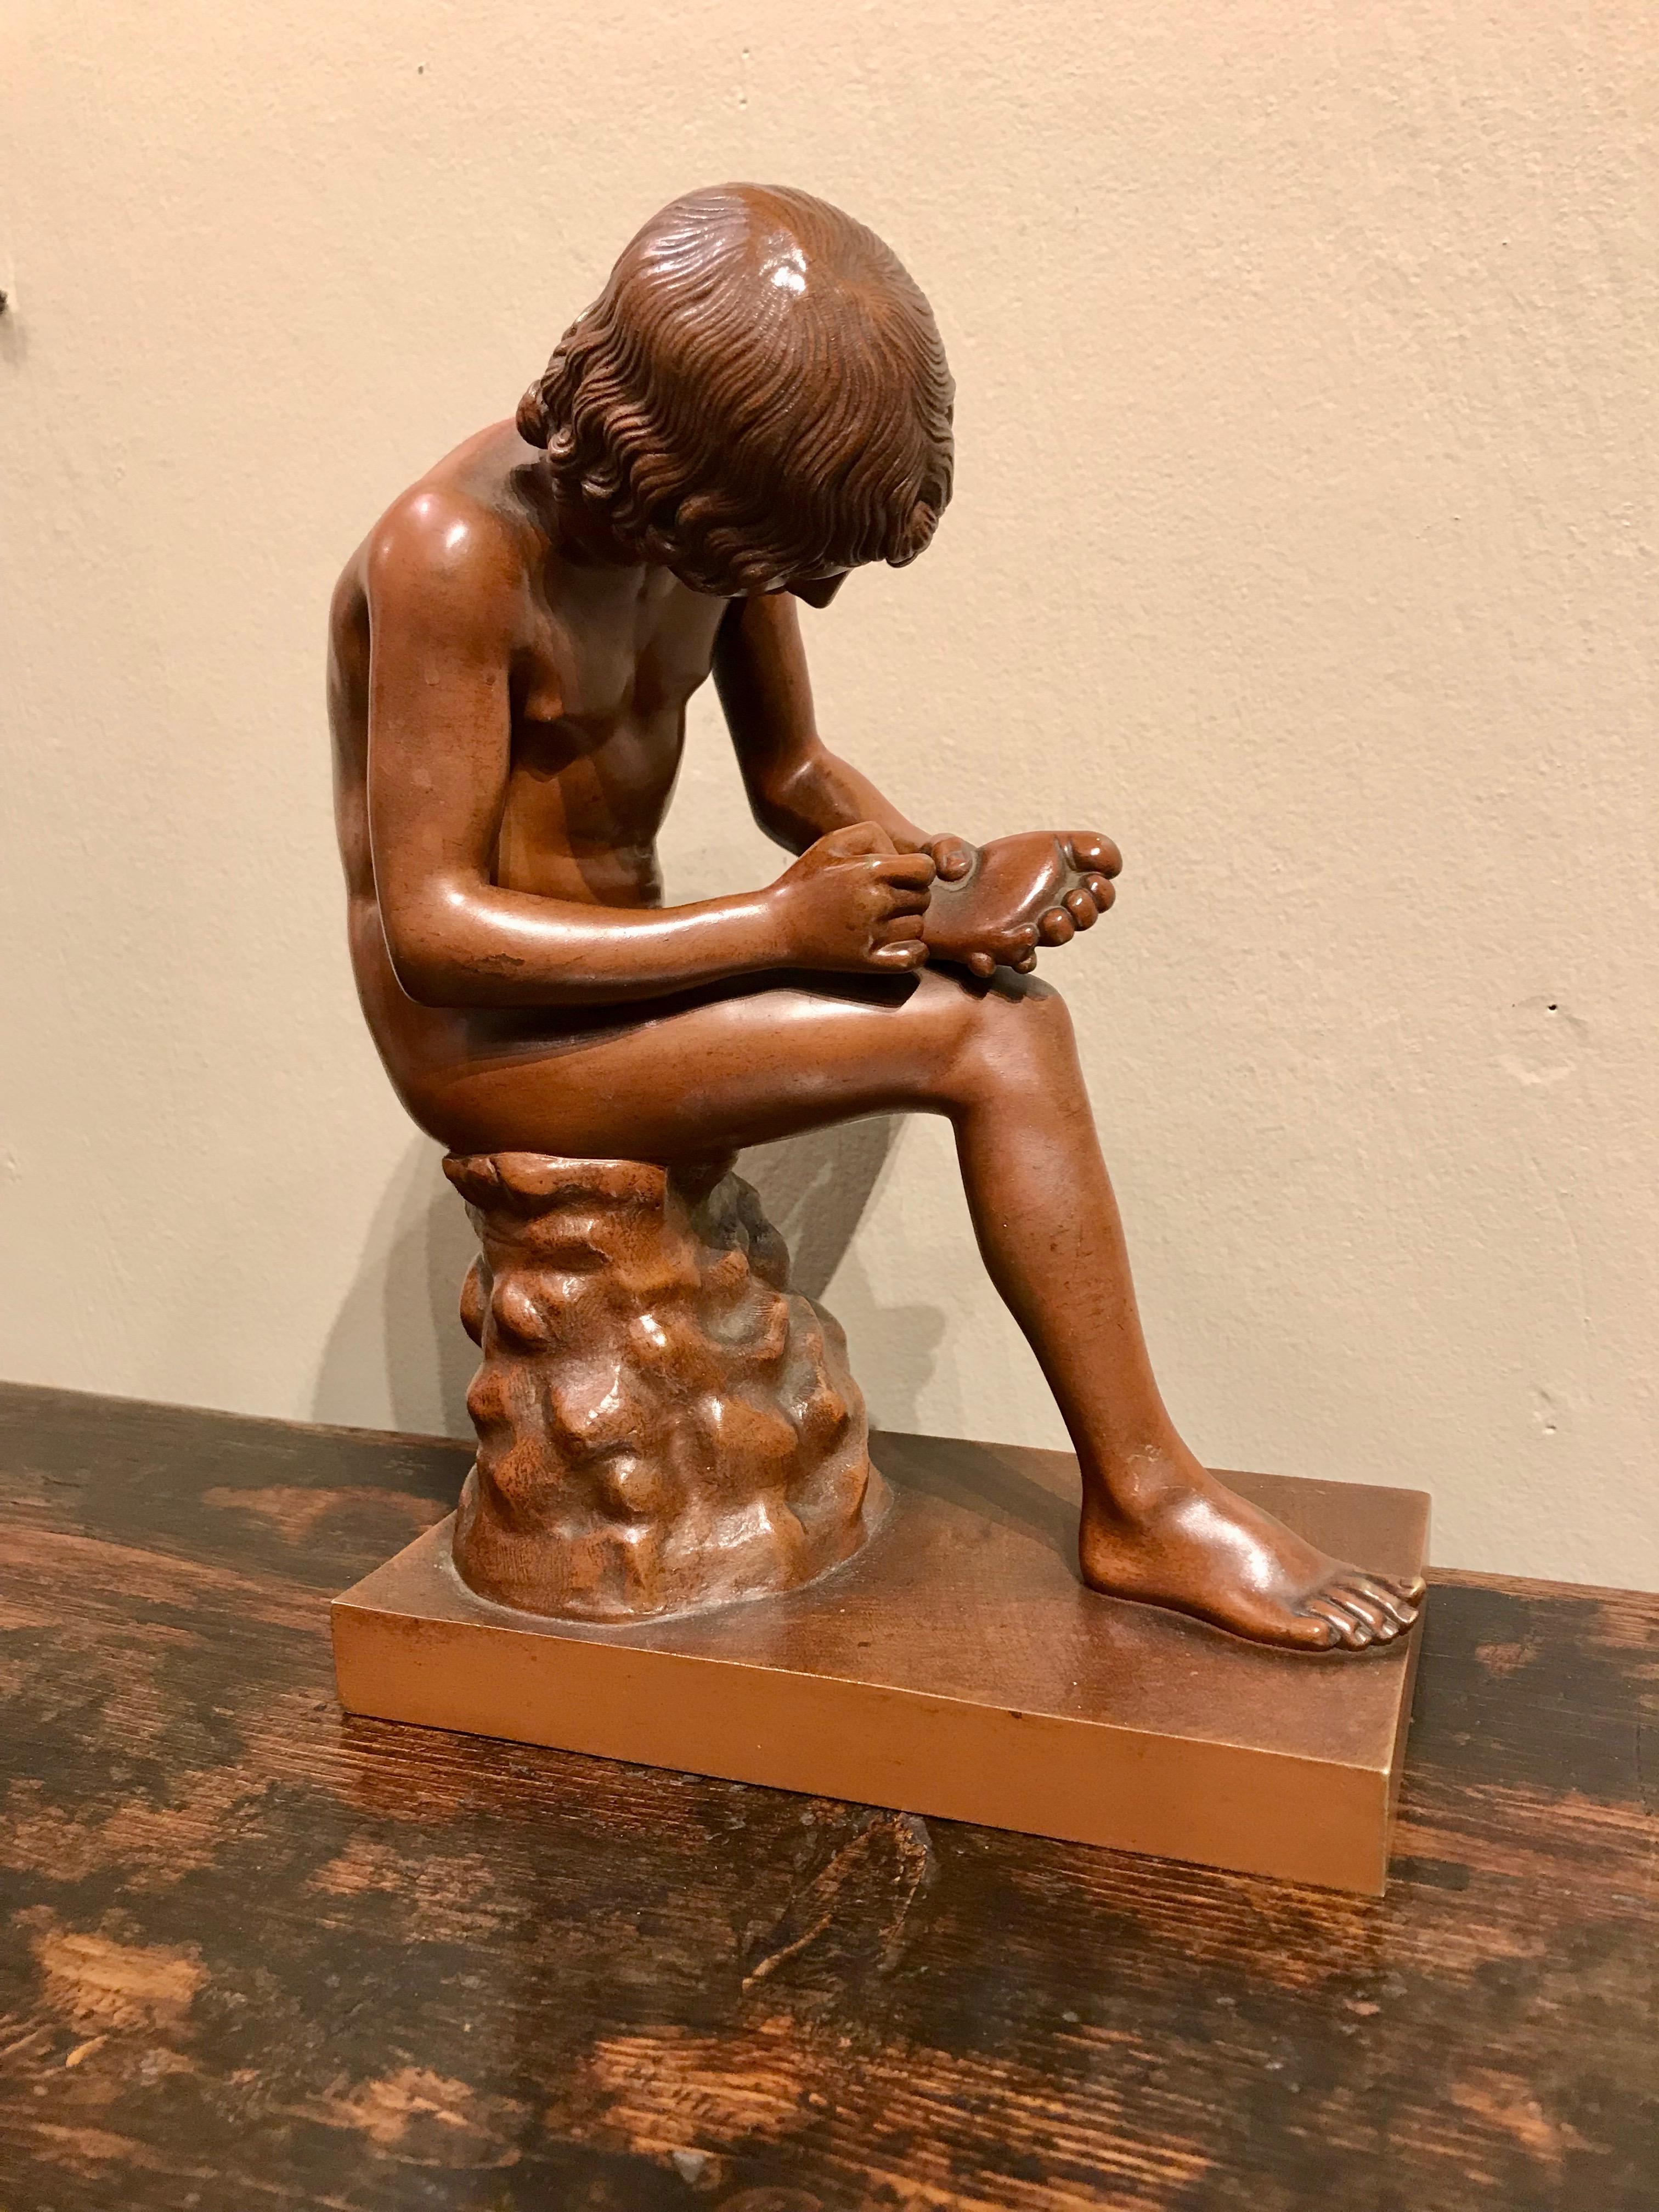 A wonderful 'Grand Tour' cast of 'Spinaro', also known as 'The Boy with Thorn' with a foundry mark of R. Bellair & Co., Berlin. This foundry was known for its rich and luminous copper toned patina that gives the sculpture a life-like quality. After